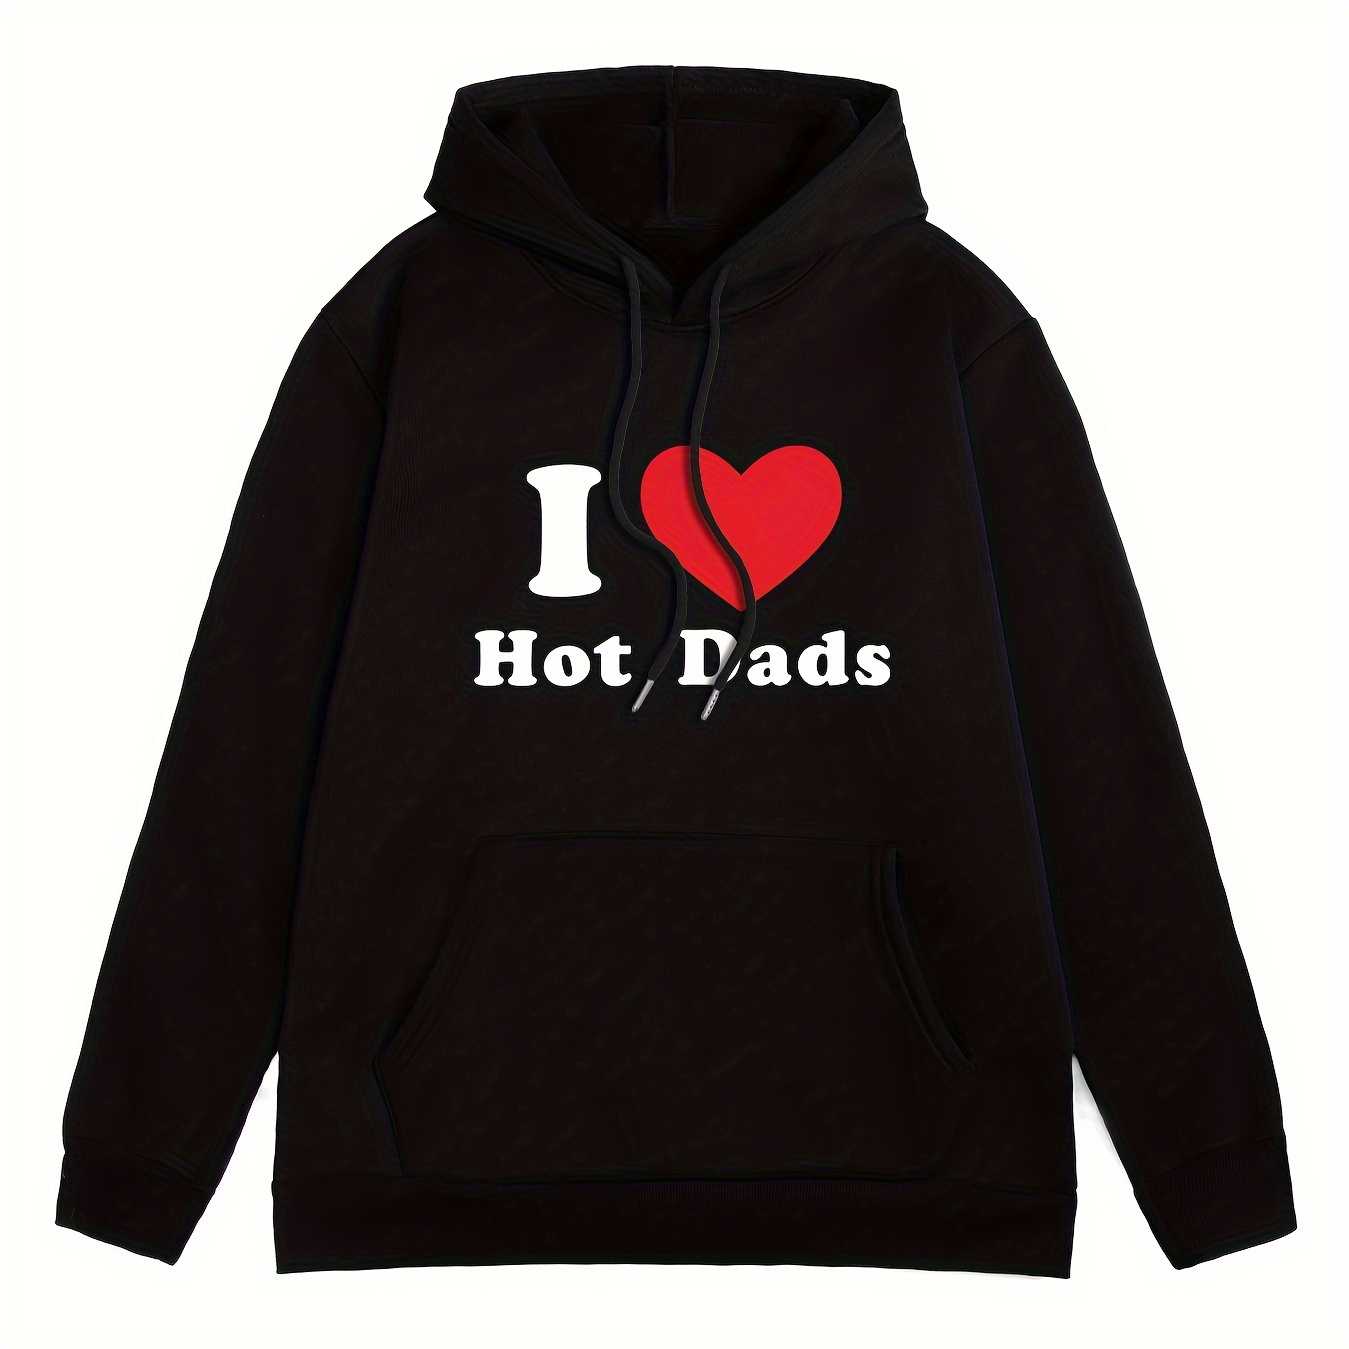 

I Love Hot Dads Print Hoodie, Cool Sweatshirt For Men, Men's Casual Hooded Pullover Streetwear Clothing For Spring Fall Winter, As Gifts